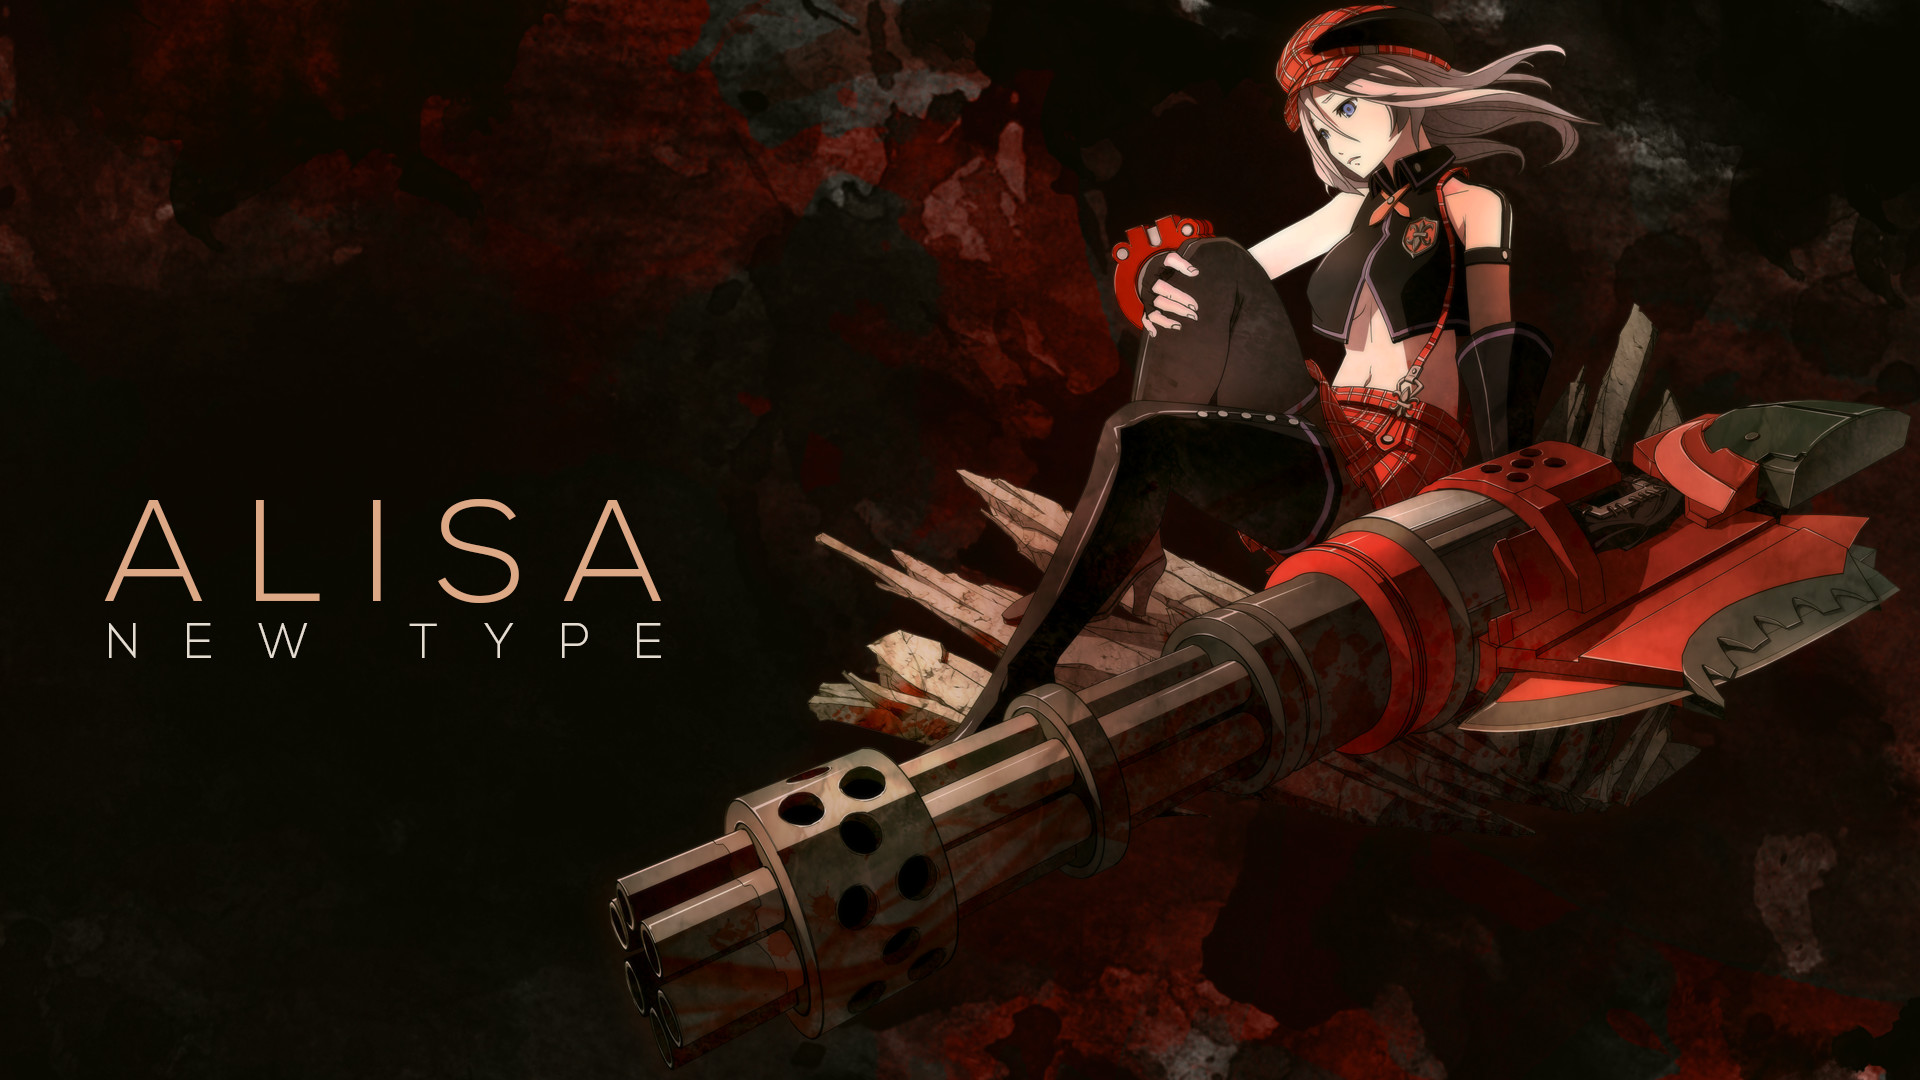 1920x1080 God Eater Wallpapers - Wallpaper Cave